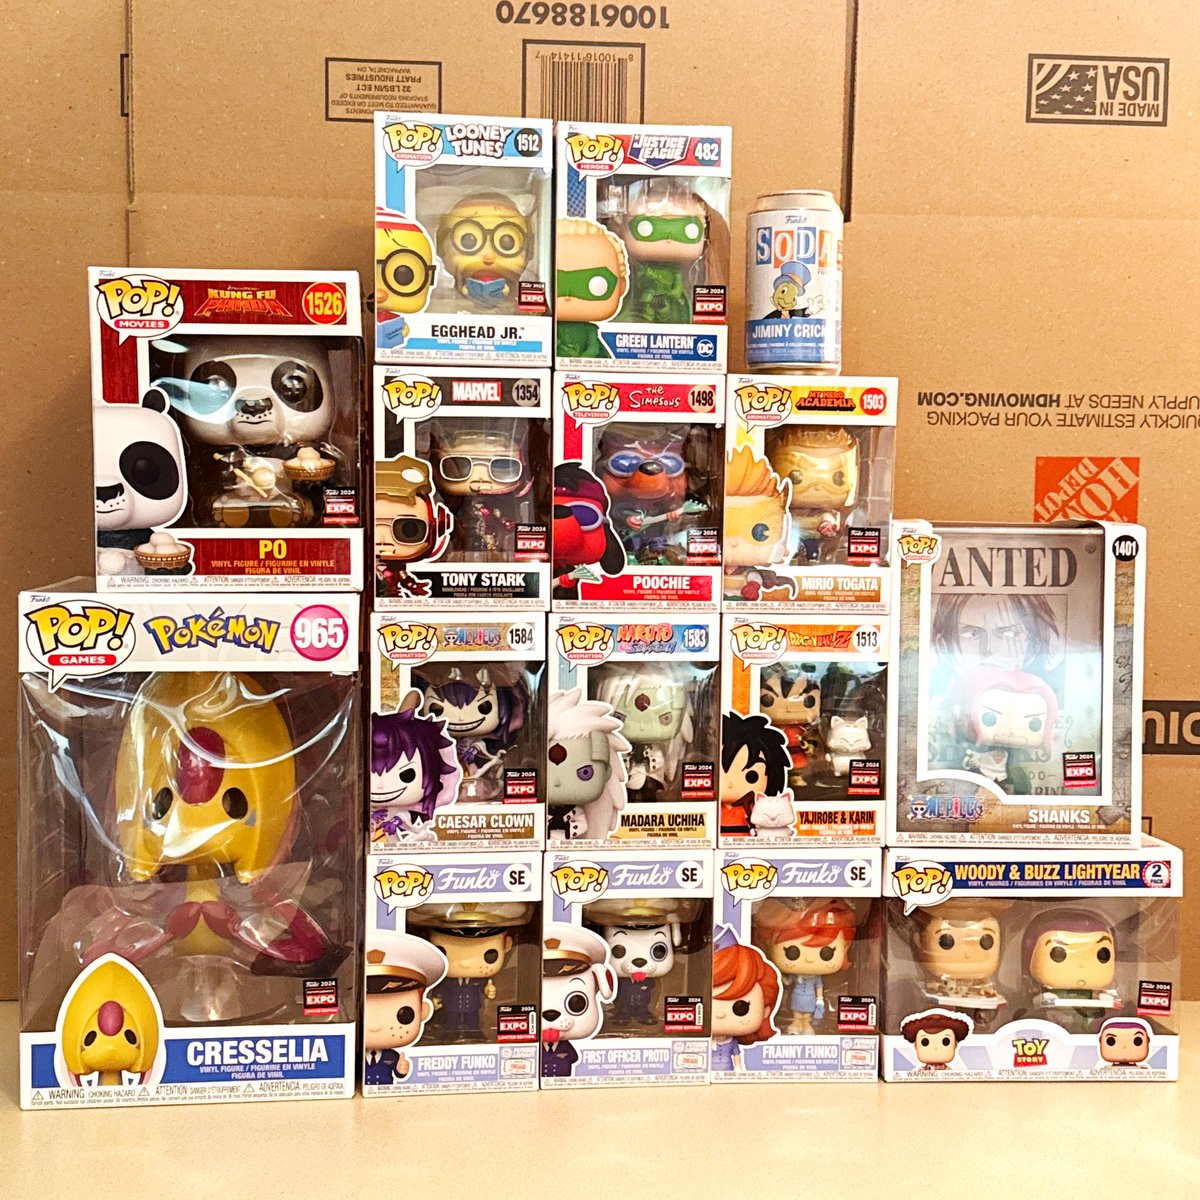 Mail call! Just unboxed the C2E2 Funko bundle! No damage luckily ~ hope your order comes in safely! #C2E2 #FPN #FunkoPOPNews #Funko #POP #POPVinyl #FunkoPOP #FunkoSoda